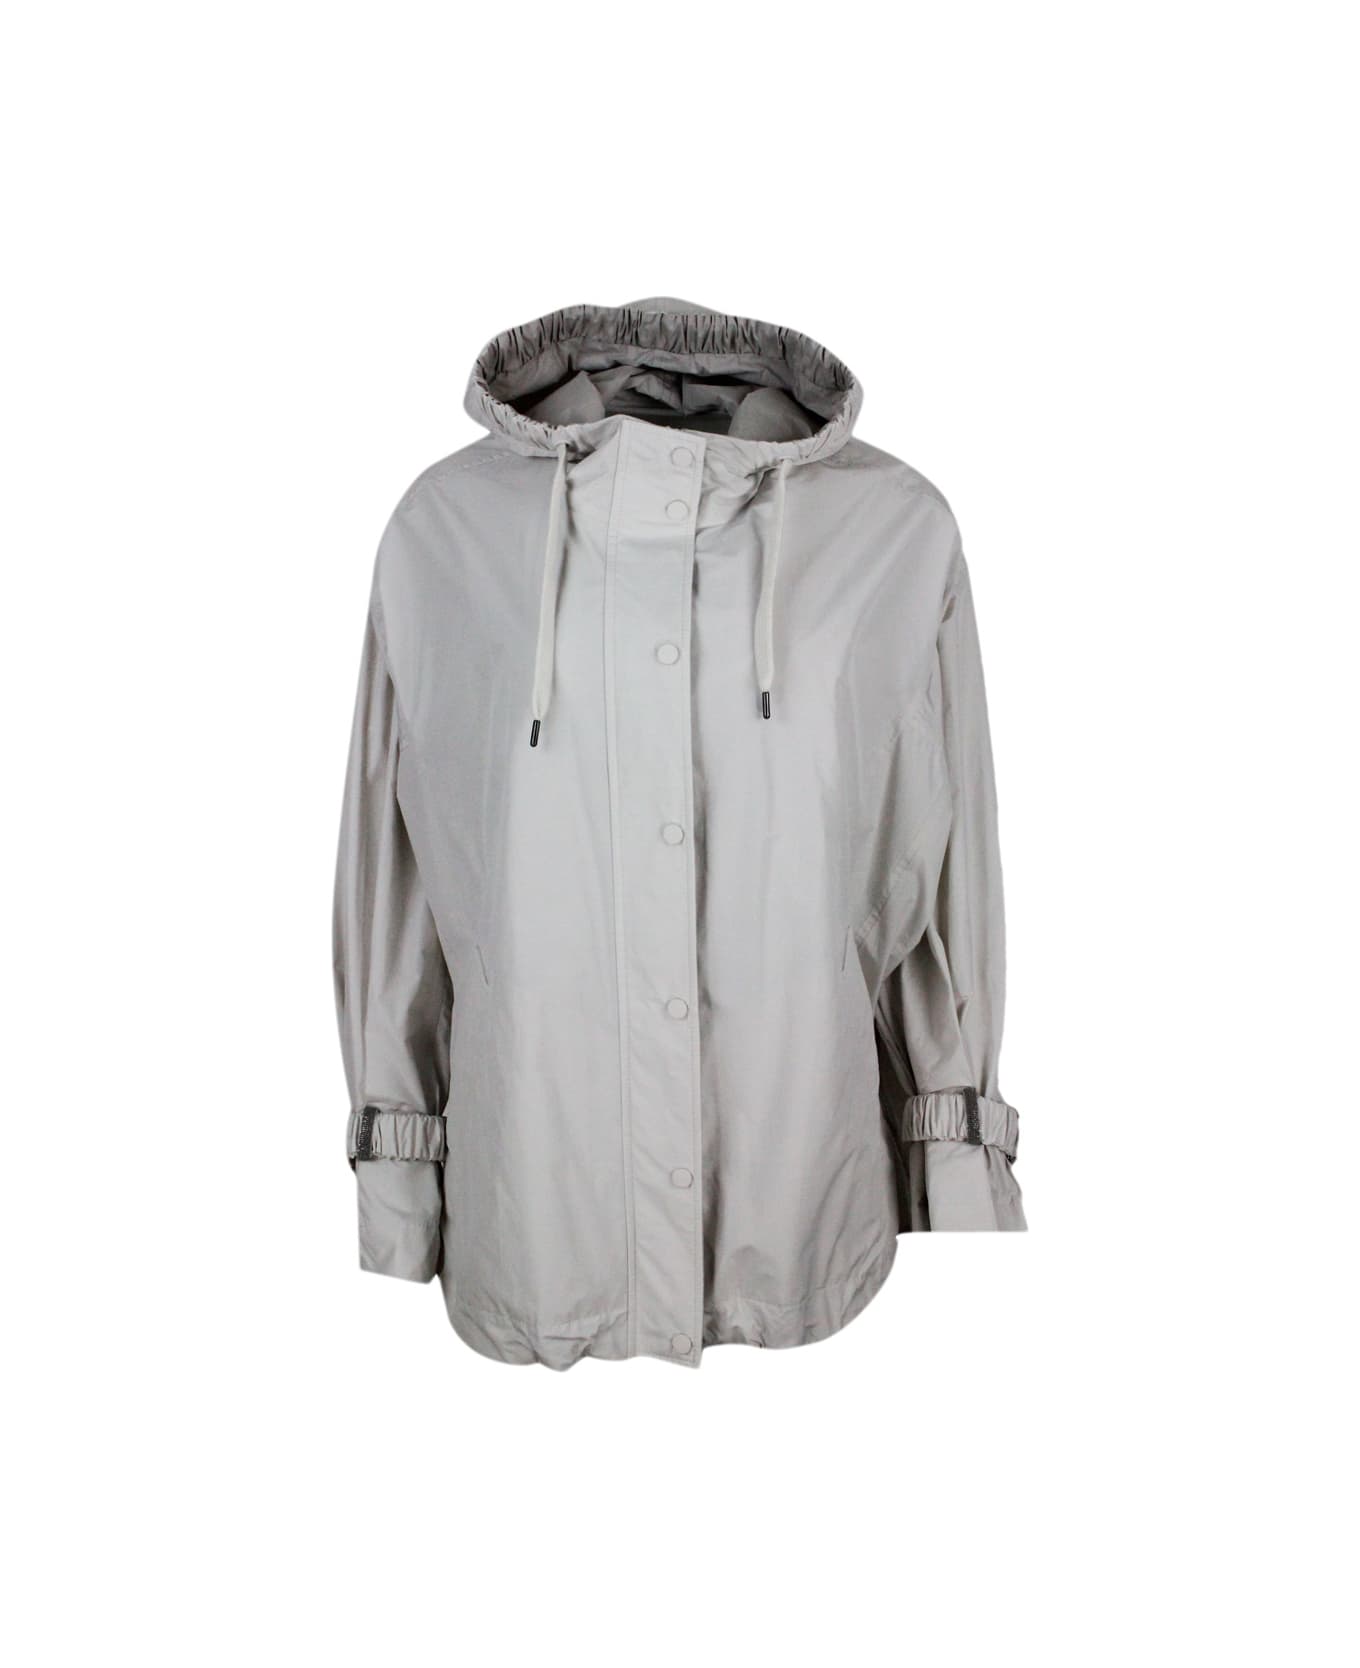 Brunello Cucinelli Water Resistant Outerware Jacket With Hood And Drawstring Hem. Curl On The Sleeve With Precious Jewel - Grey Plaster